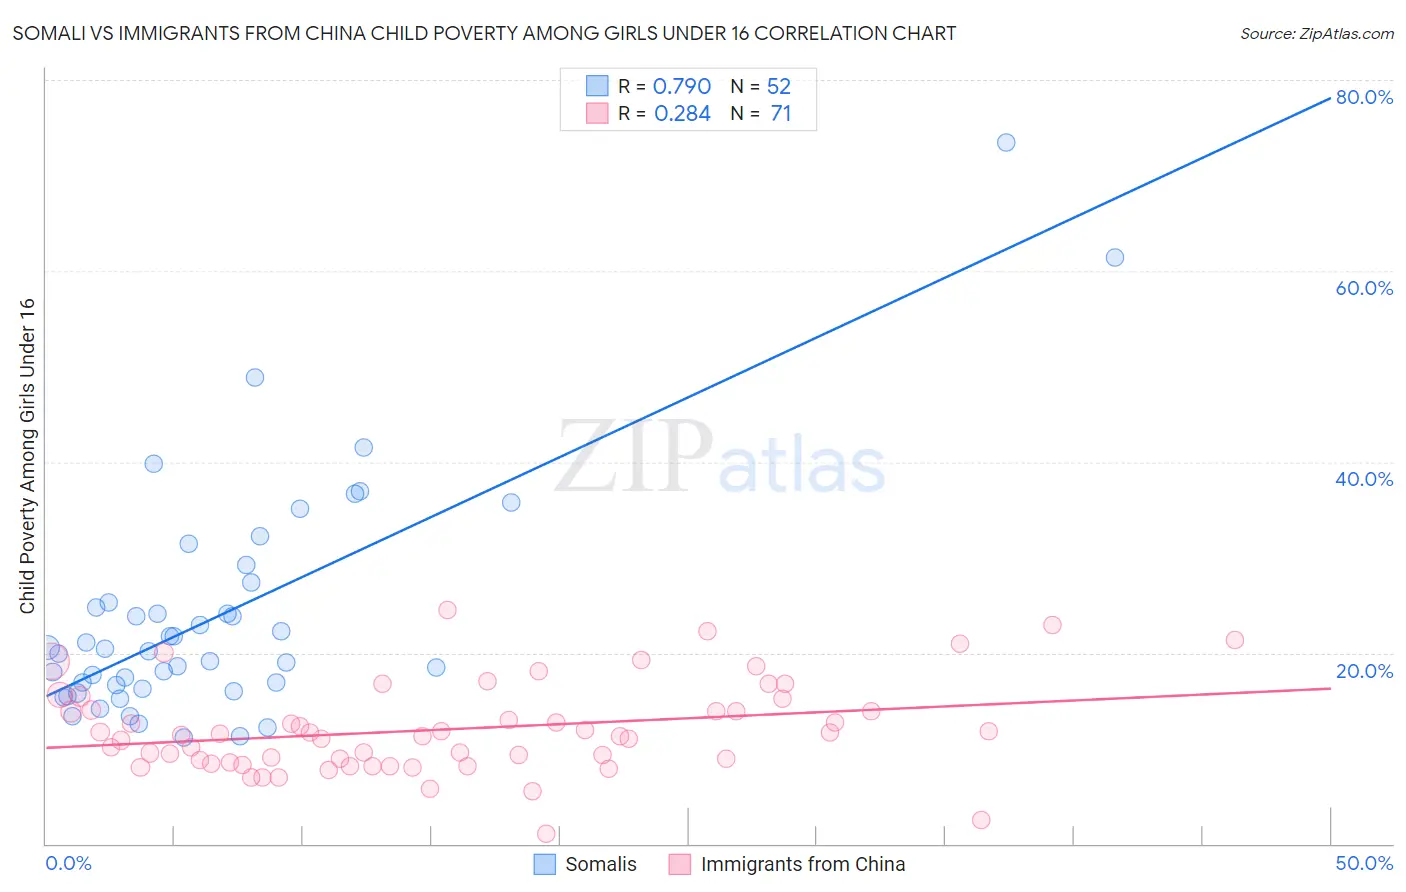 Somali vs Immigrants from China Child Poverty Among Girls Under 16